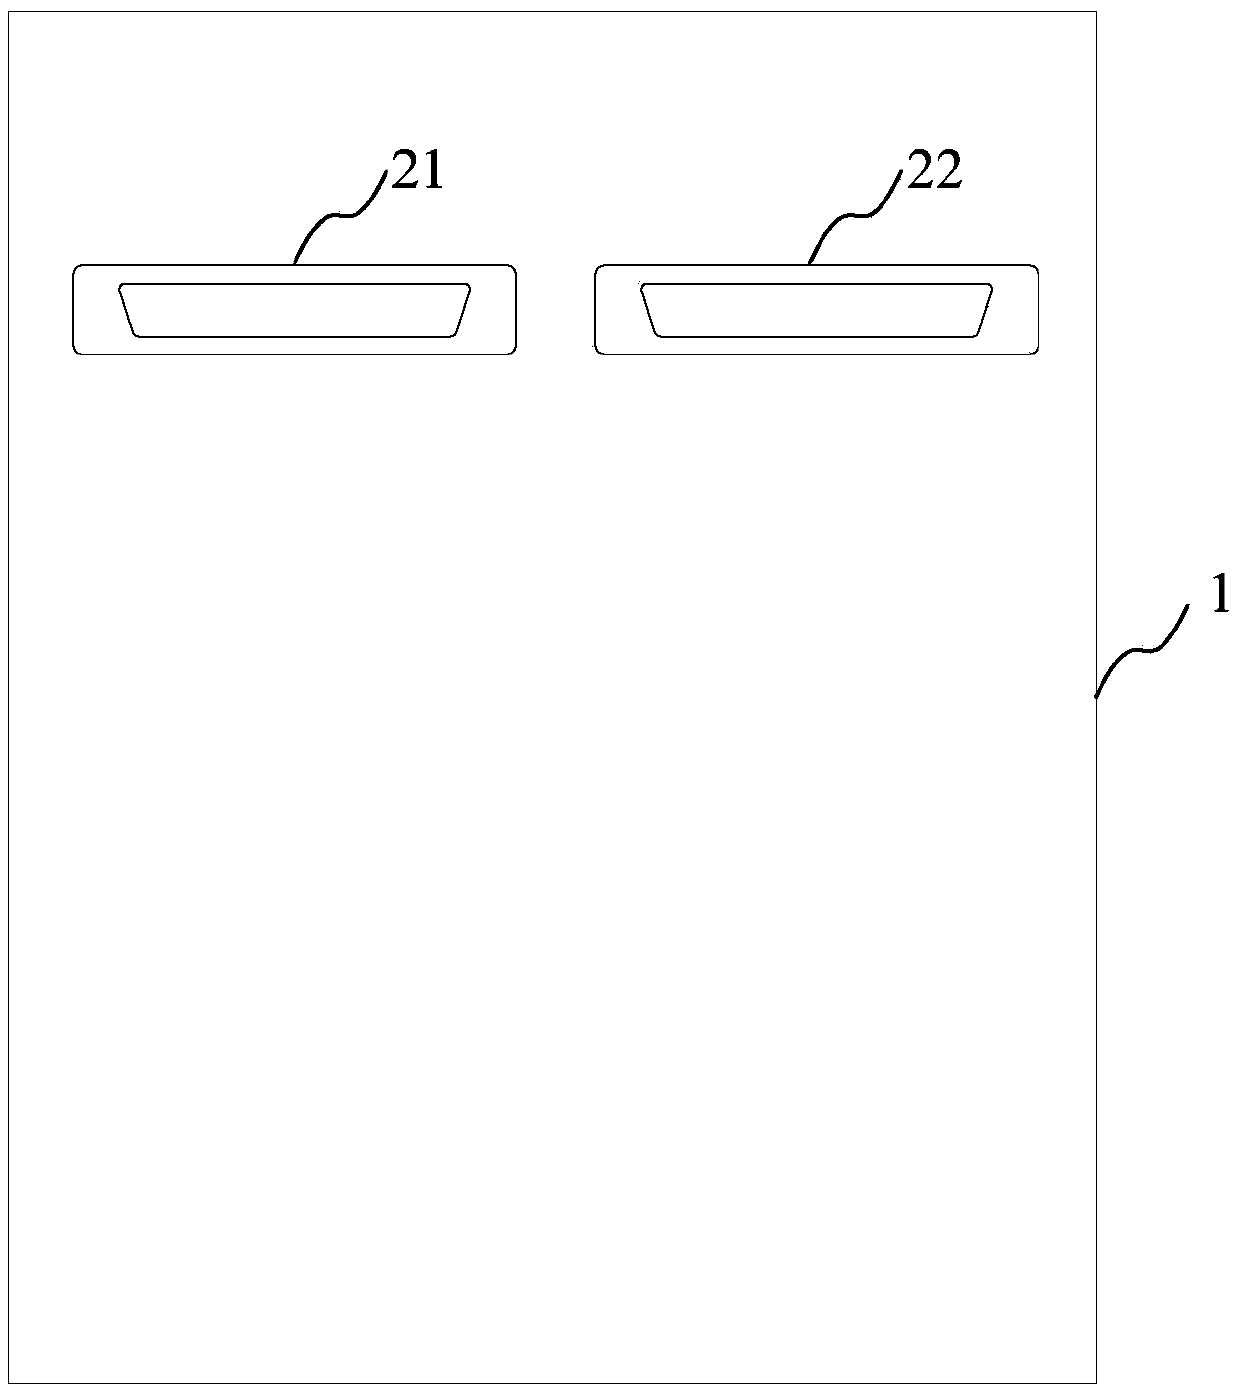 Signal connection system of network switch support plate and sandwich panel